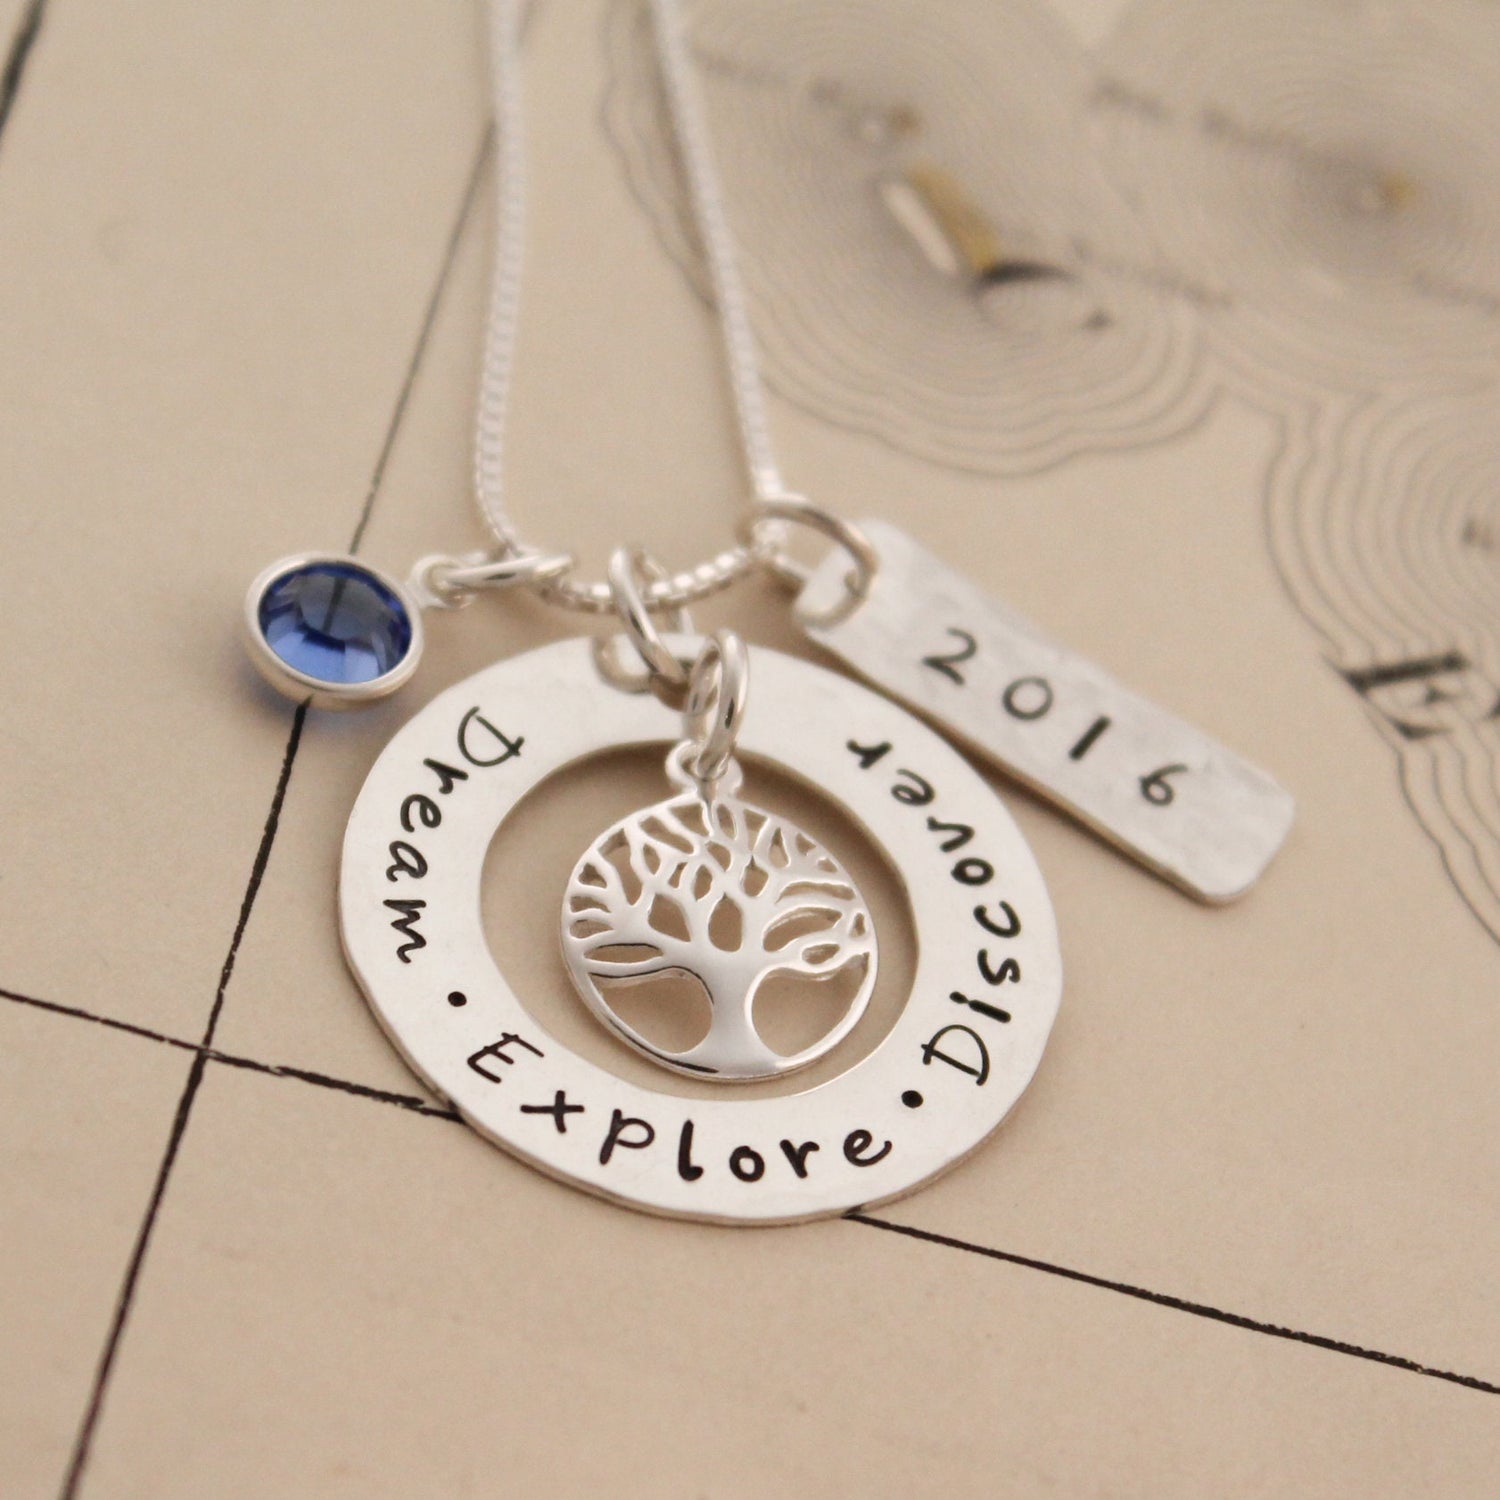 Dream Explore Discover Necklace, Personalized Graduation Jewelry, Graduation Gift, Hand Stamped Necklace, Personalized Jewelry, Tree Jewelry